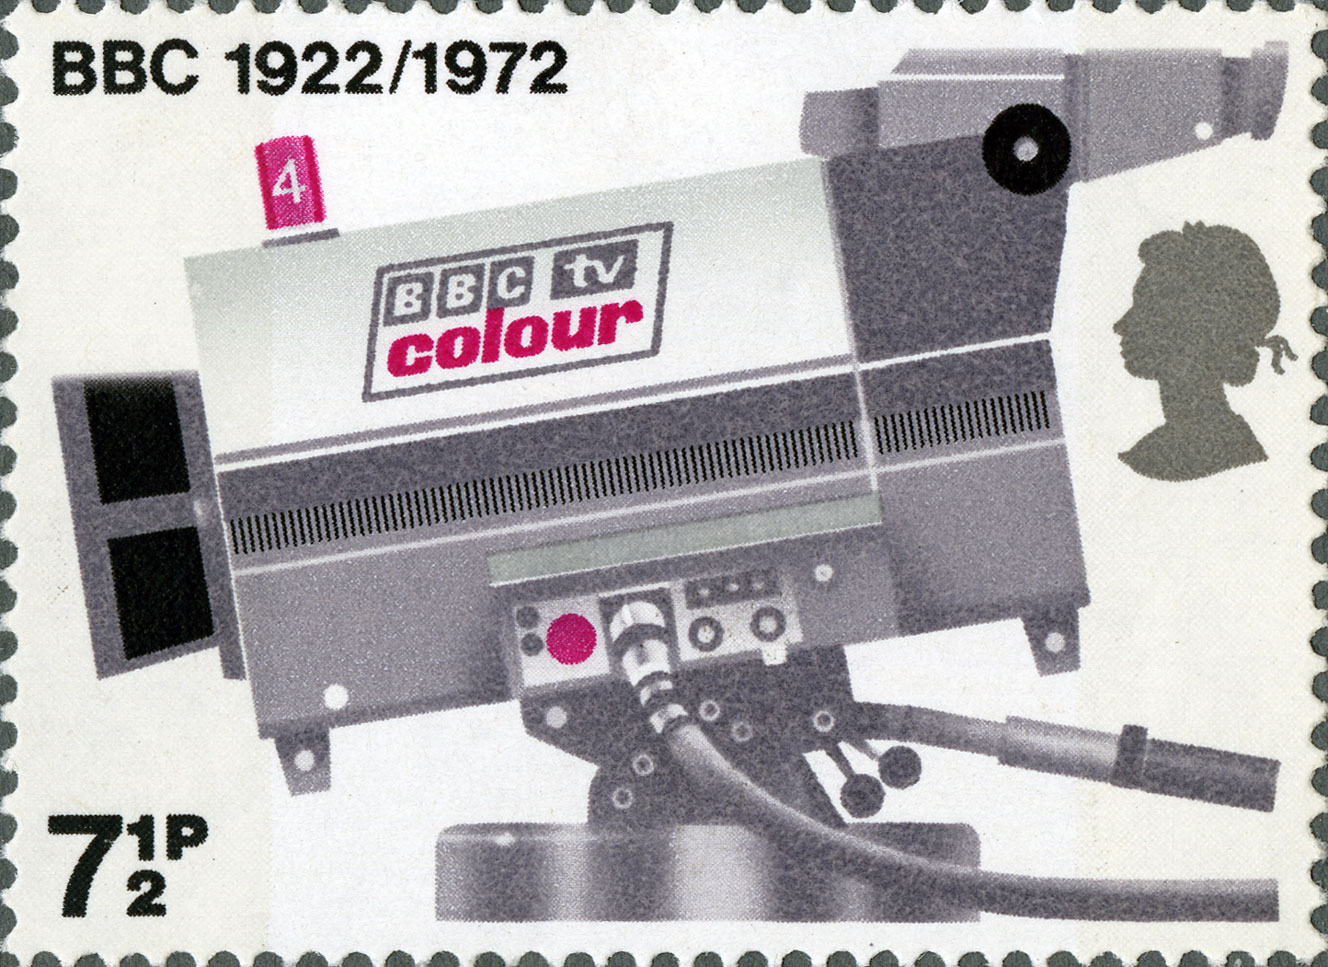 Stamp depicting a television camera used by the BBC.